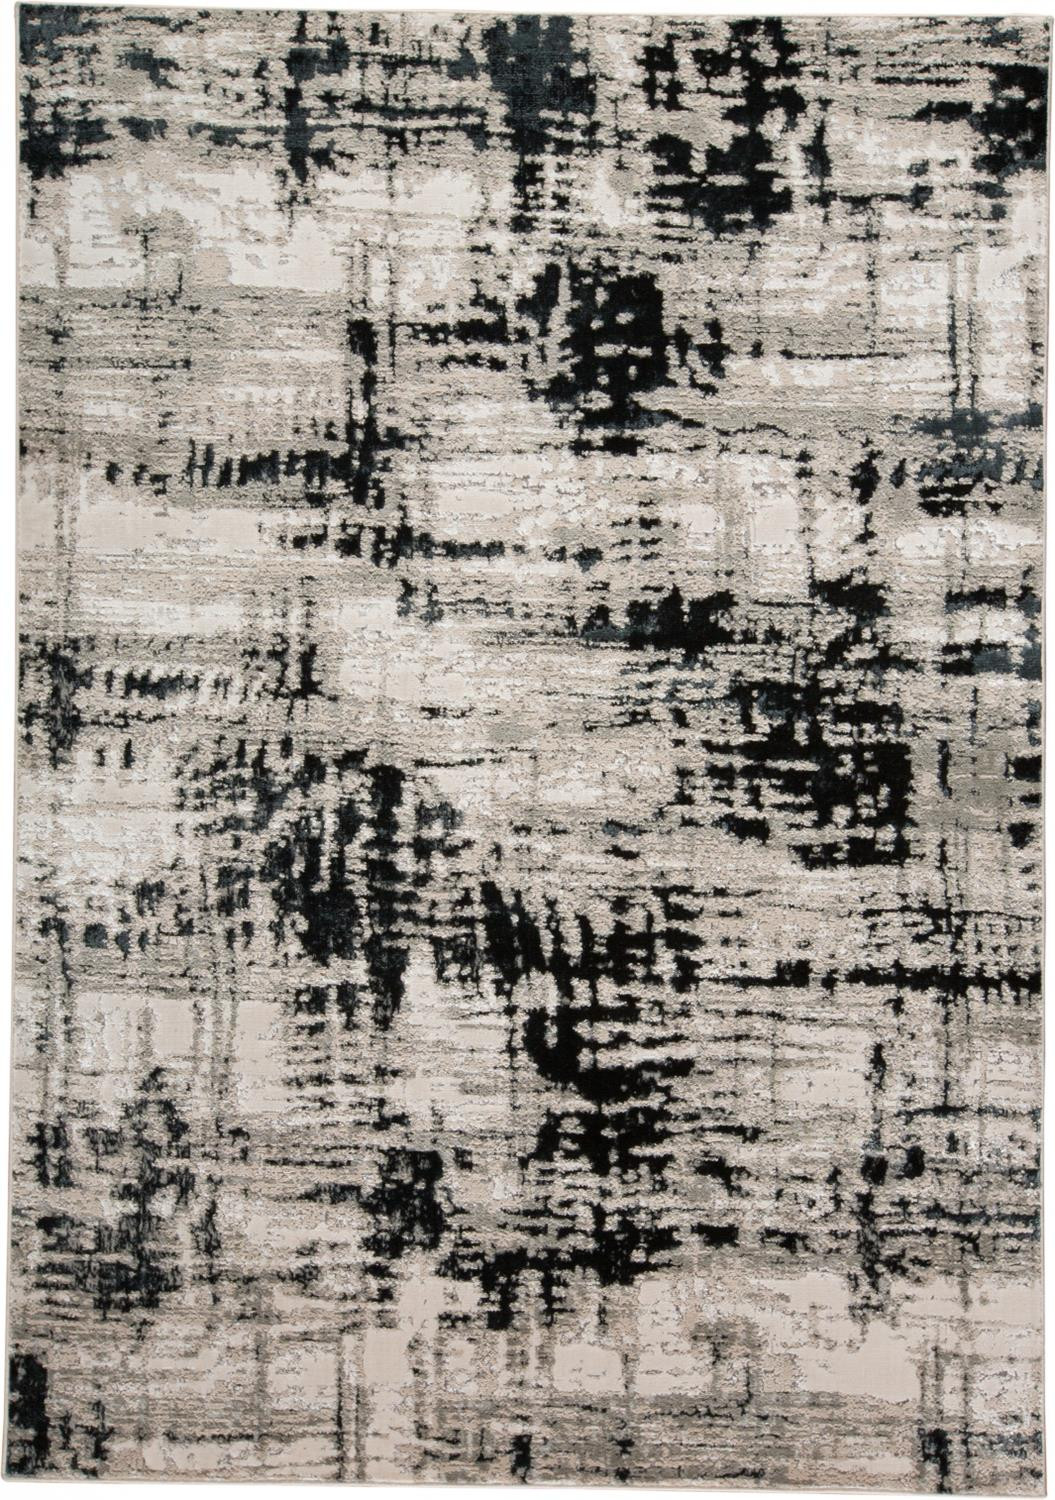 8' X 10' Black White And Gray Area Rug-515294-1